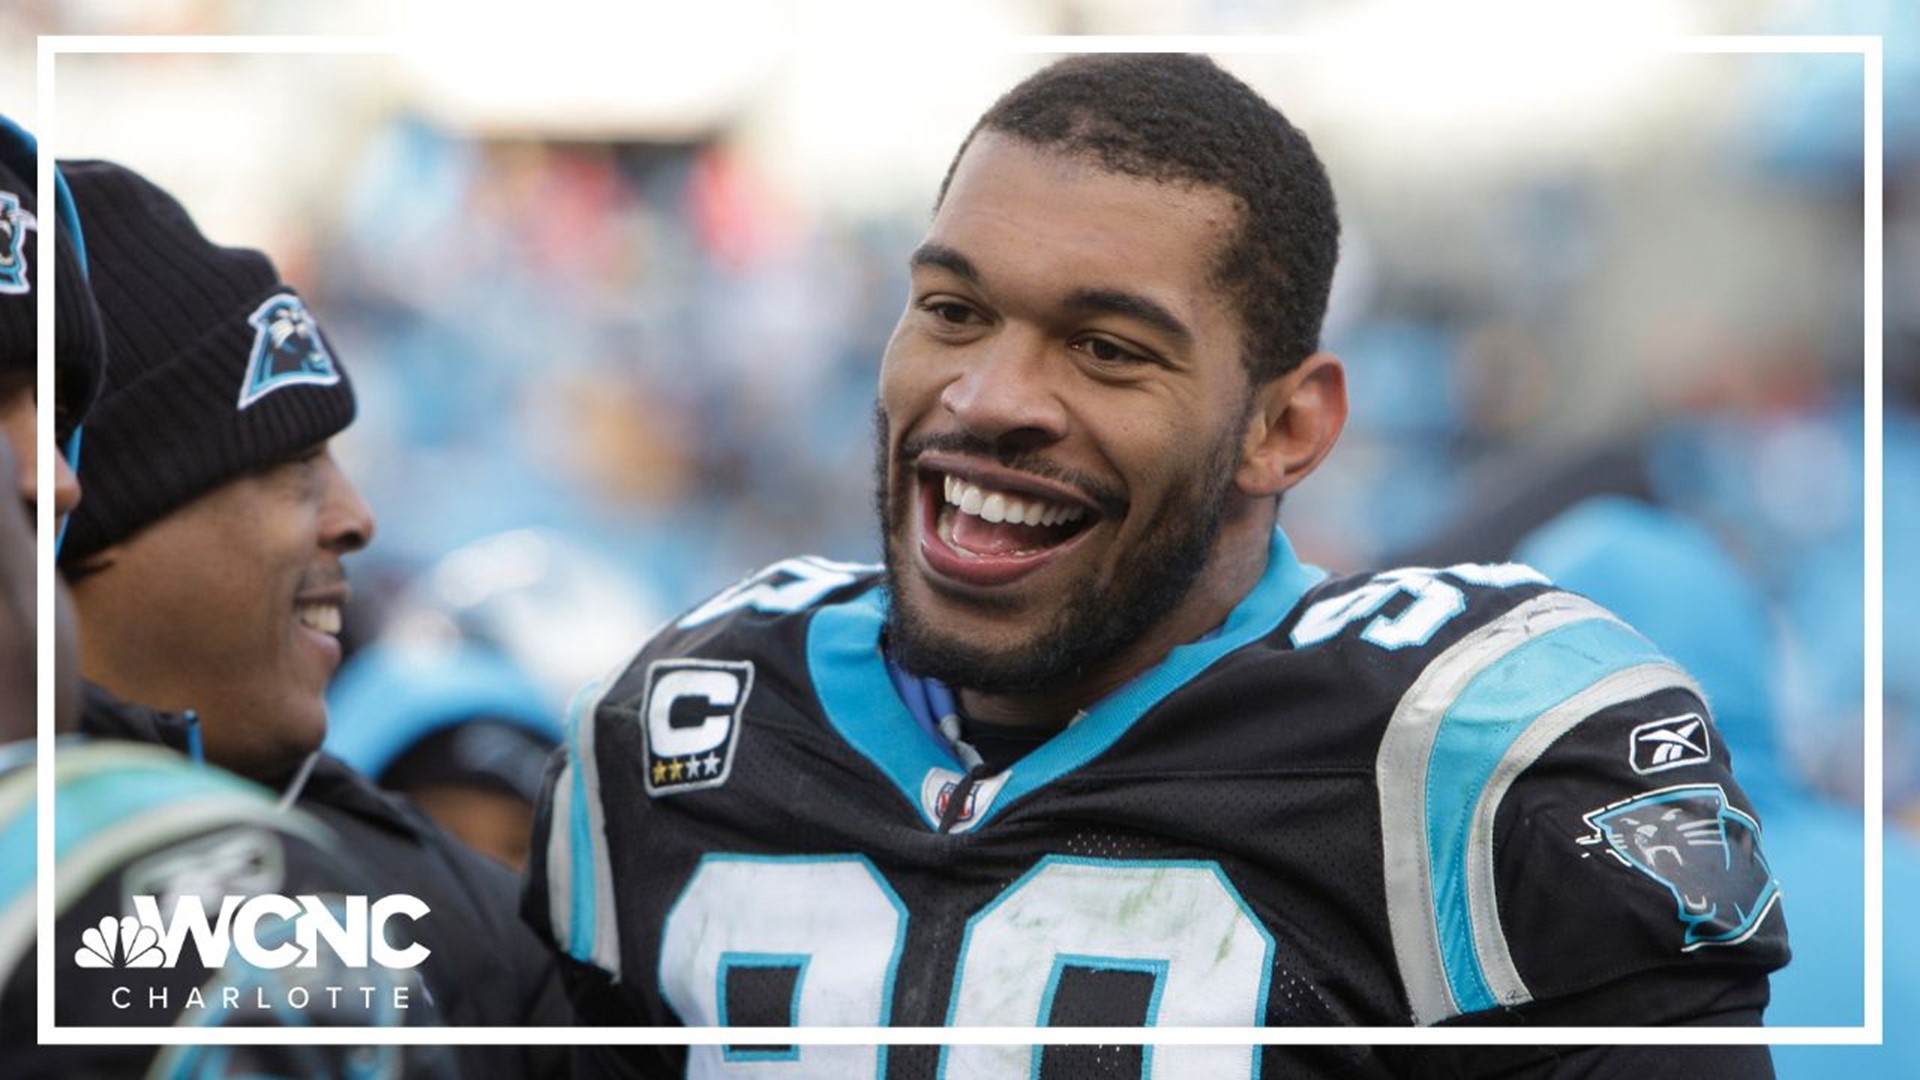 Darin Gantt, a member of the Hall of Fame selection committee, discusses Julius Peppers' legendary career and the chances other Panthers greats could be enshrined.